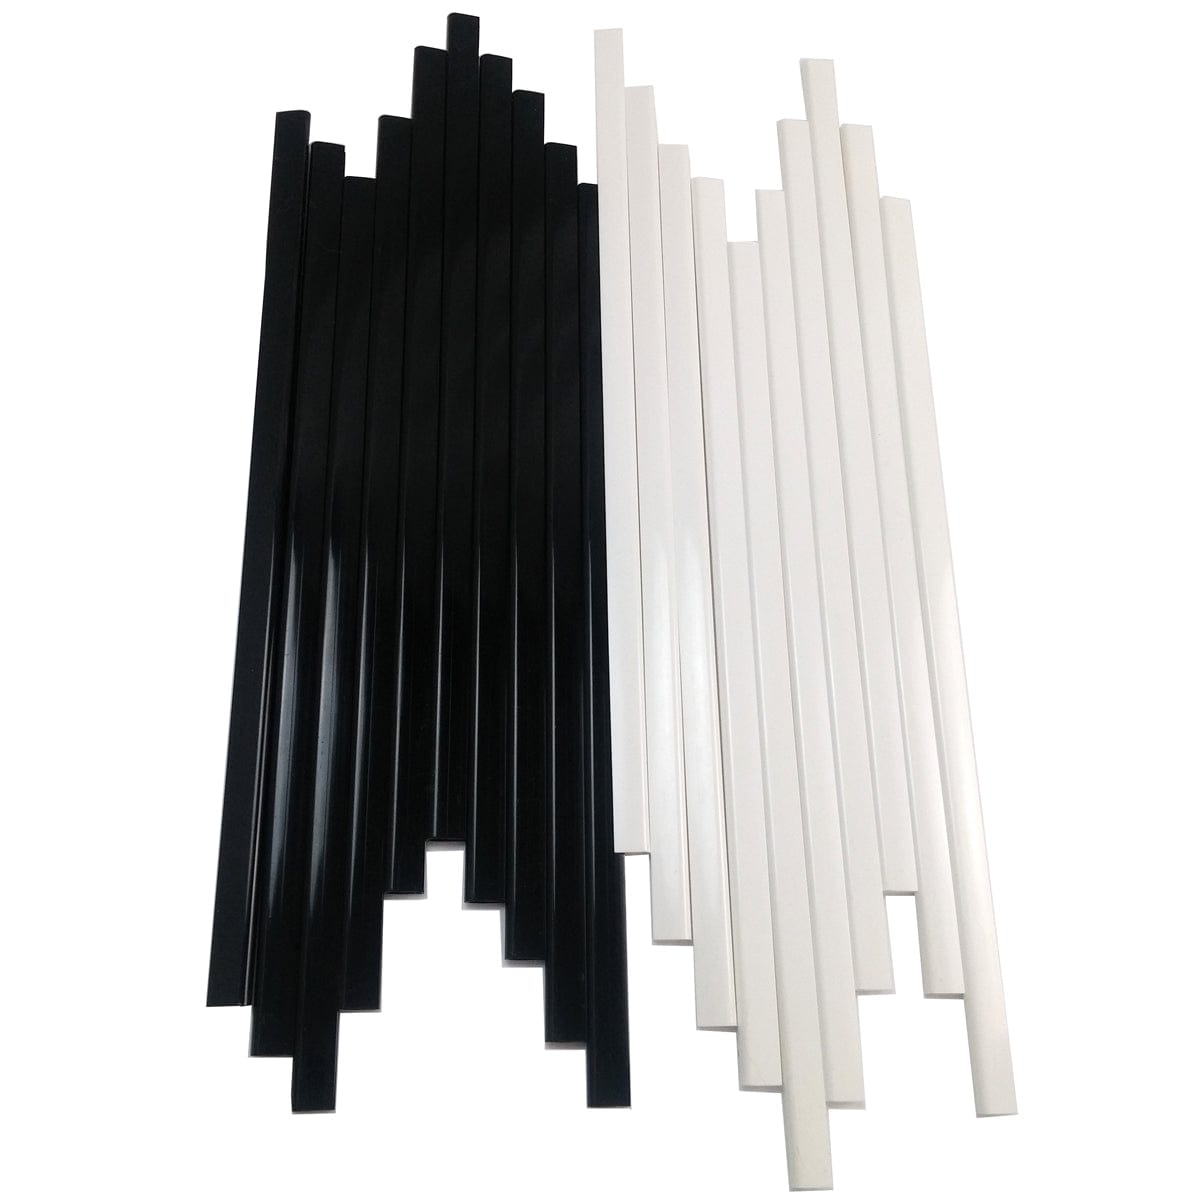 Black and white edgers designed for coroplast products